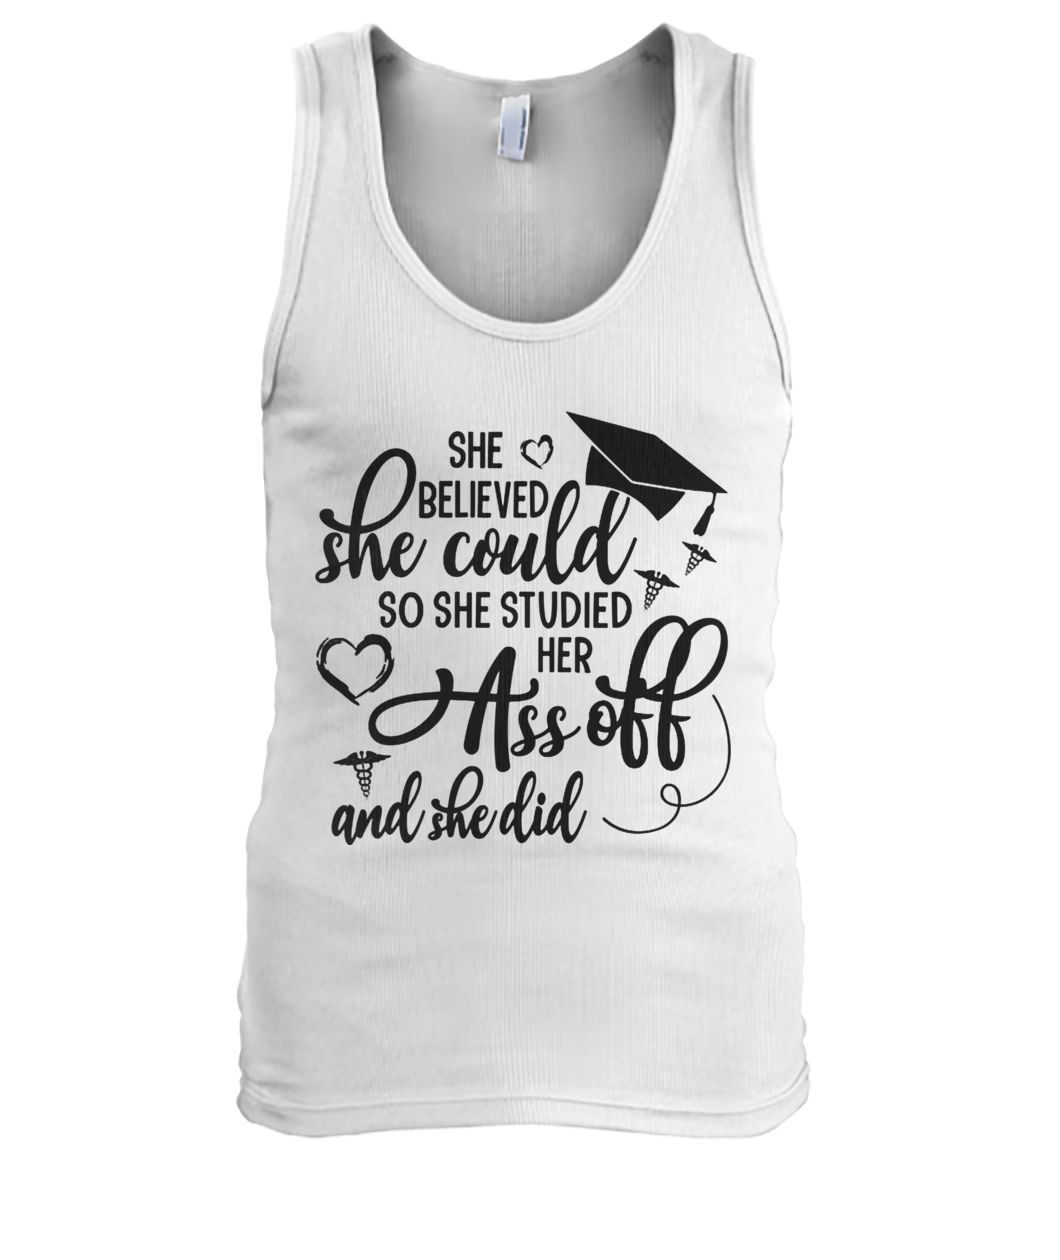 She believed she could so she studied her ass off and she did men's tank top